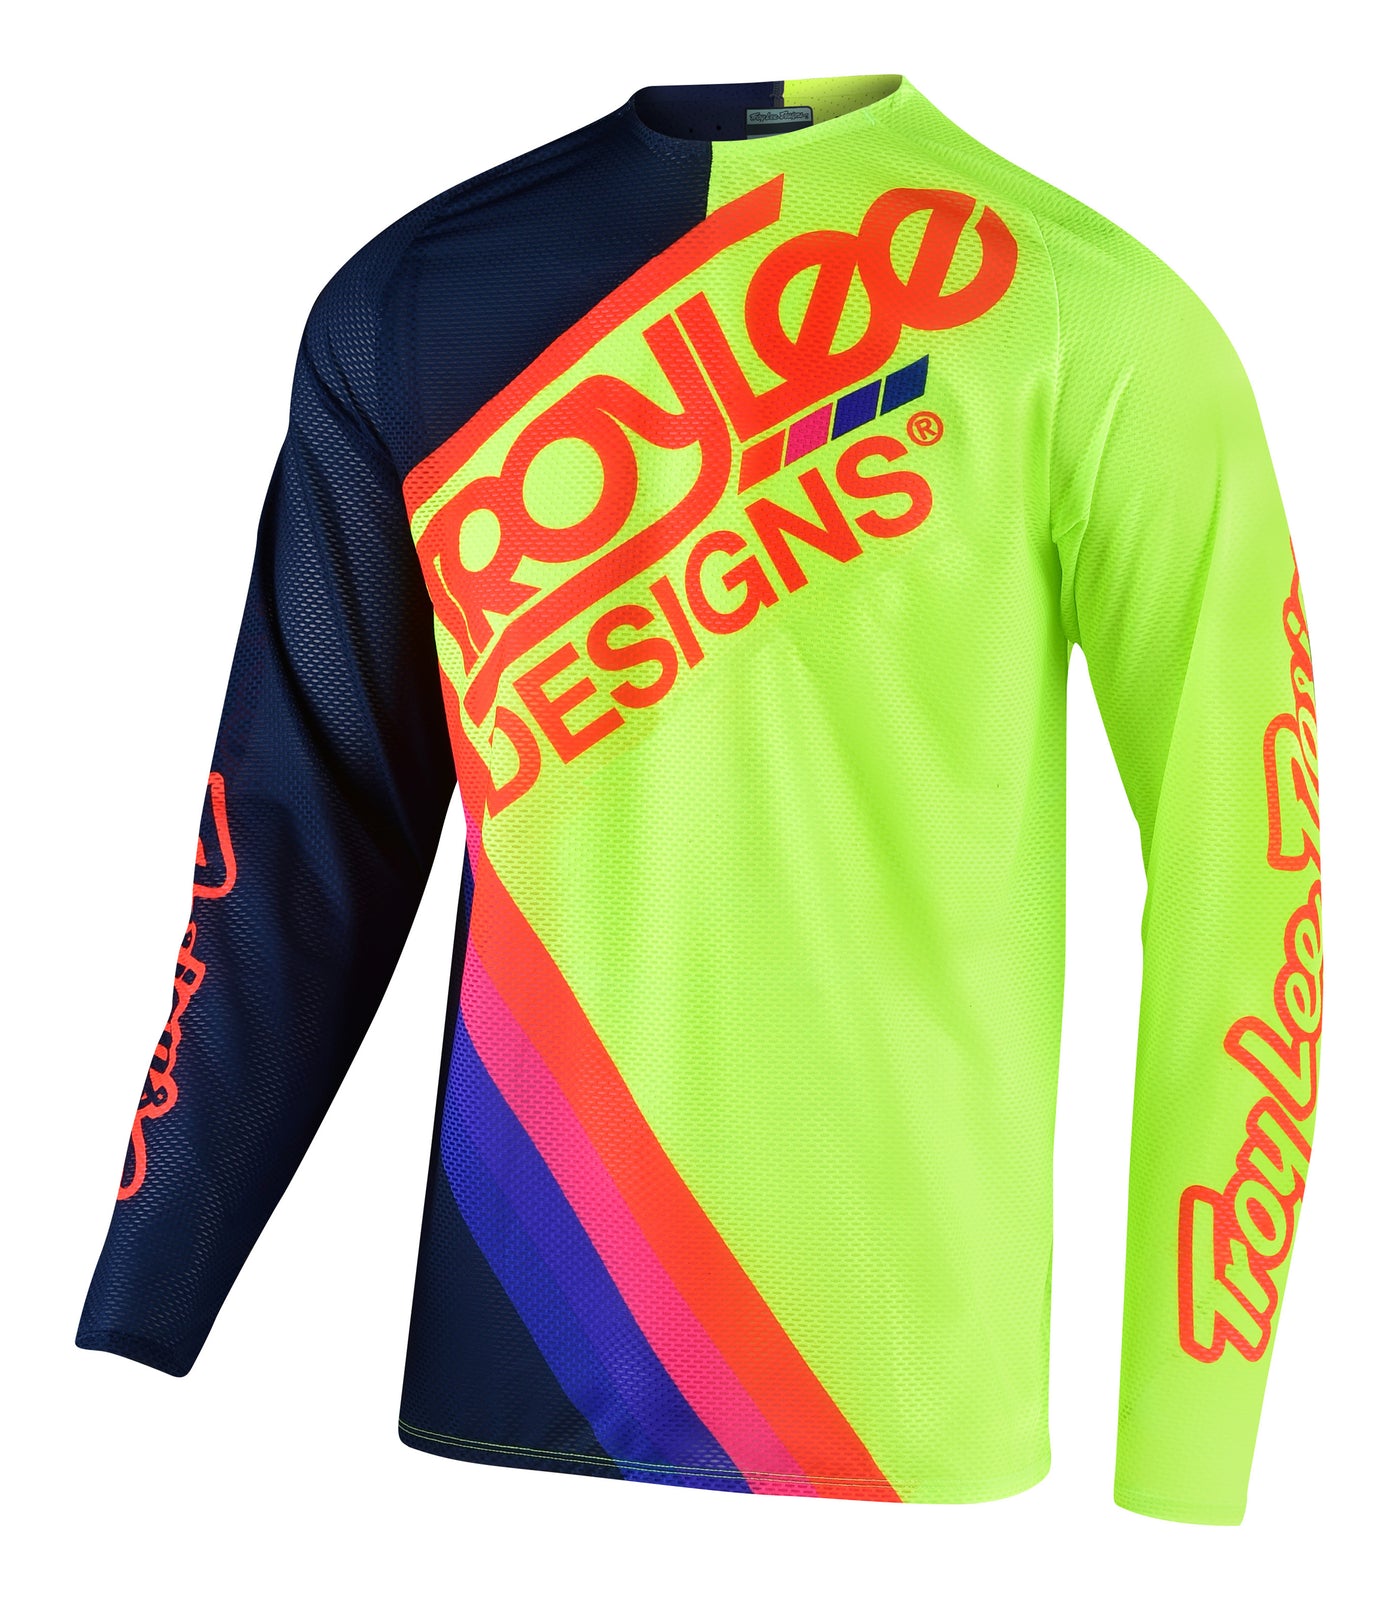 Troy Lee Designs GP Air Tilt Vented Youth Jersey